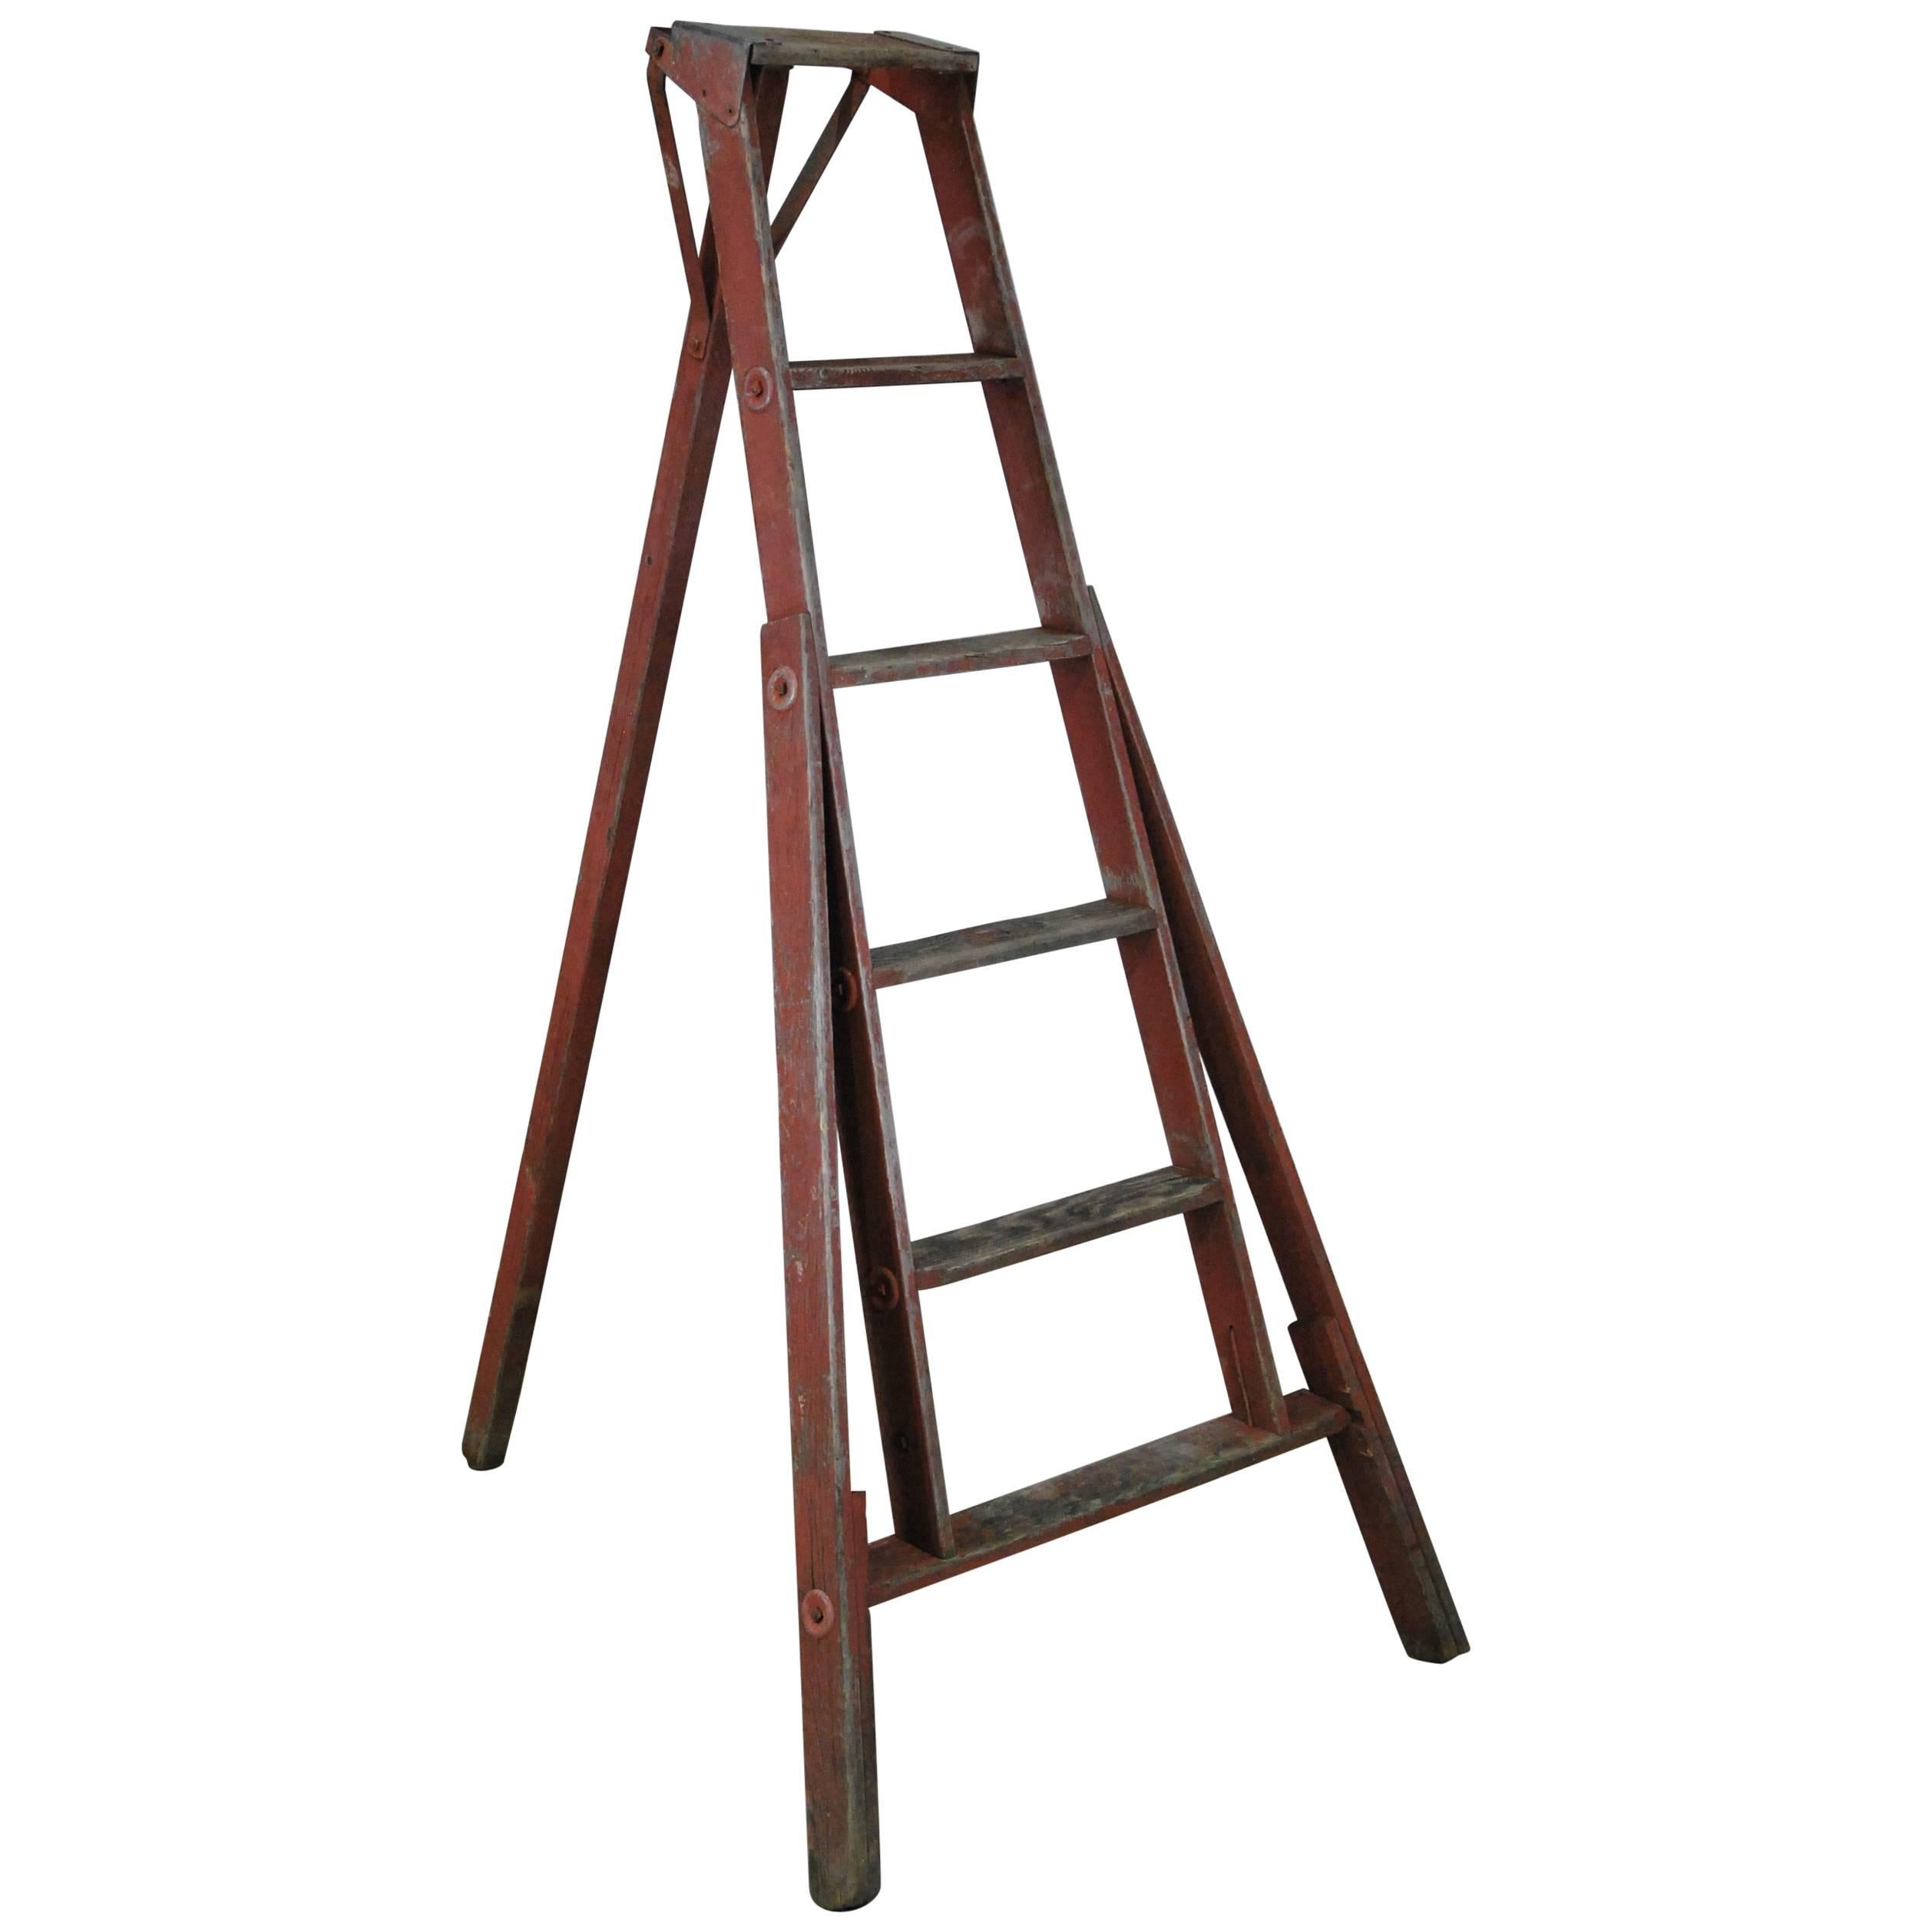 1940 Wooden Orchard Ladder in Old Paint